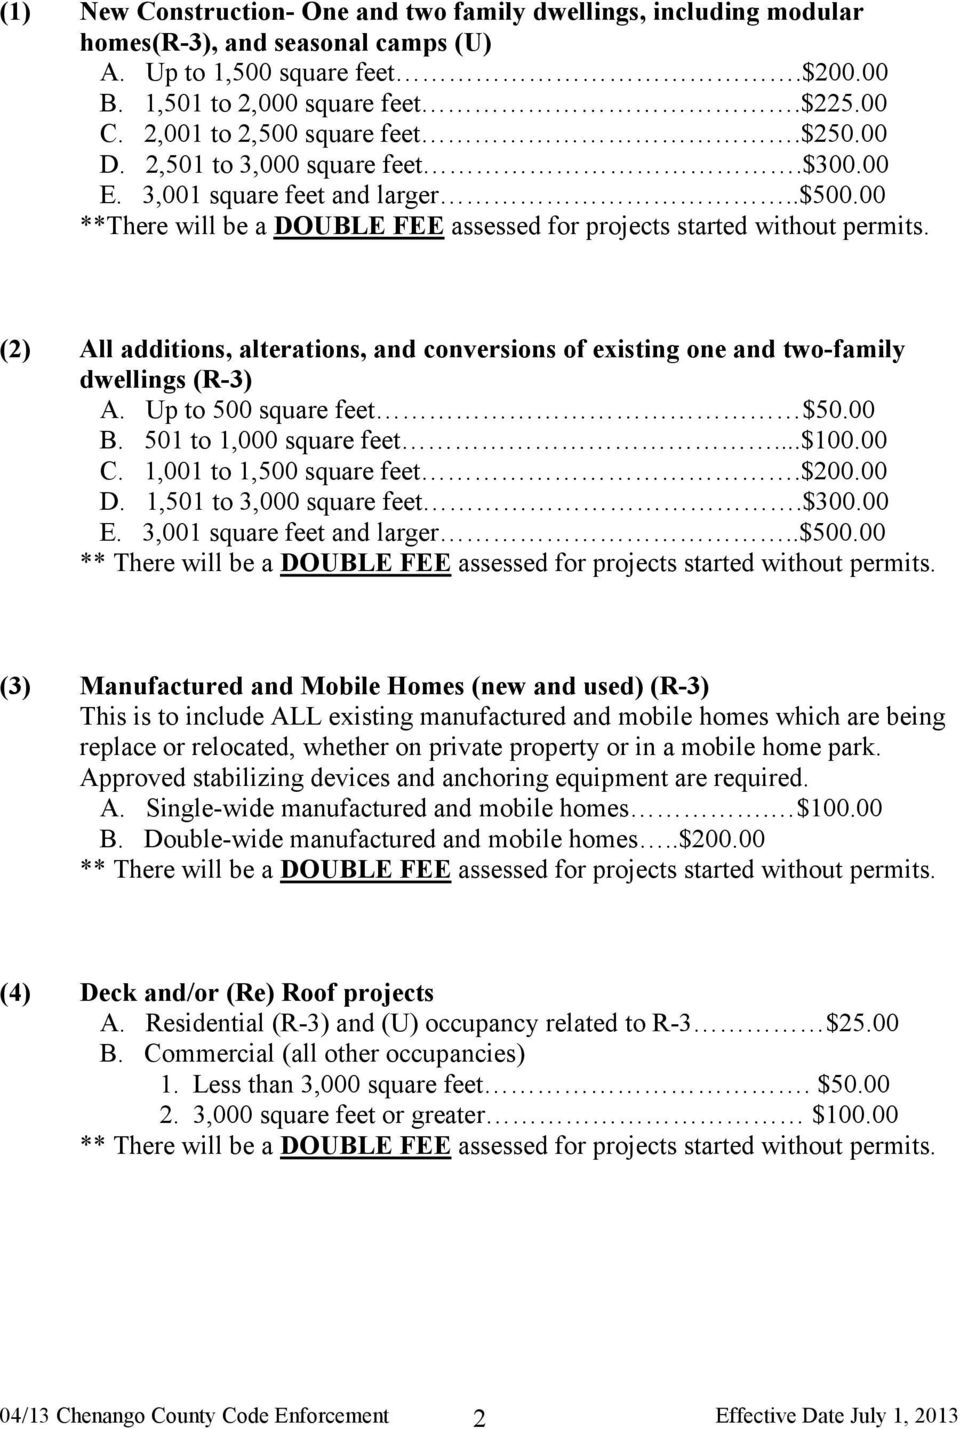 (2) All additions, alterations, and conversions of existing one and two-family dwellings (R-3) A. Up to 500 square feet $50.00 B. 501 to 1,000 square feet...$100.00 C. 1,001 to 1,500 square feet.$200.